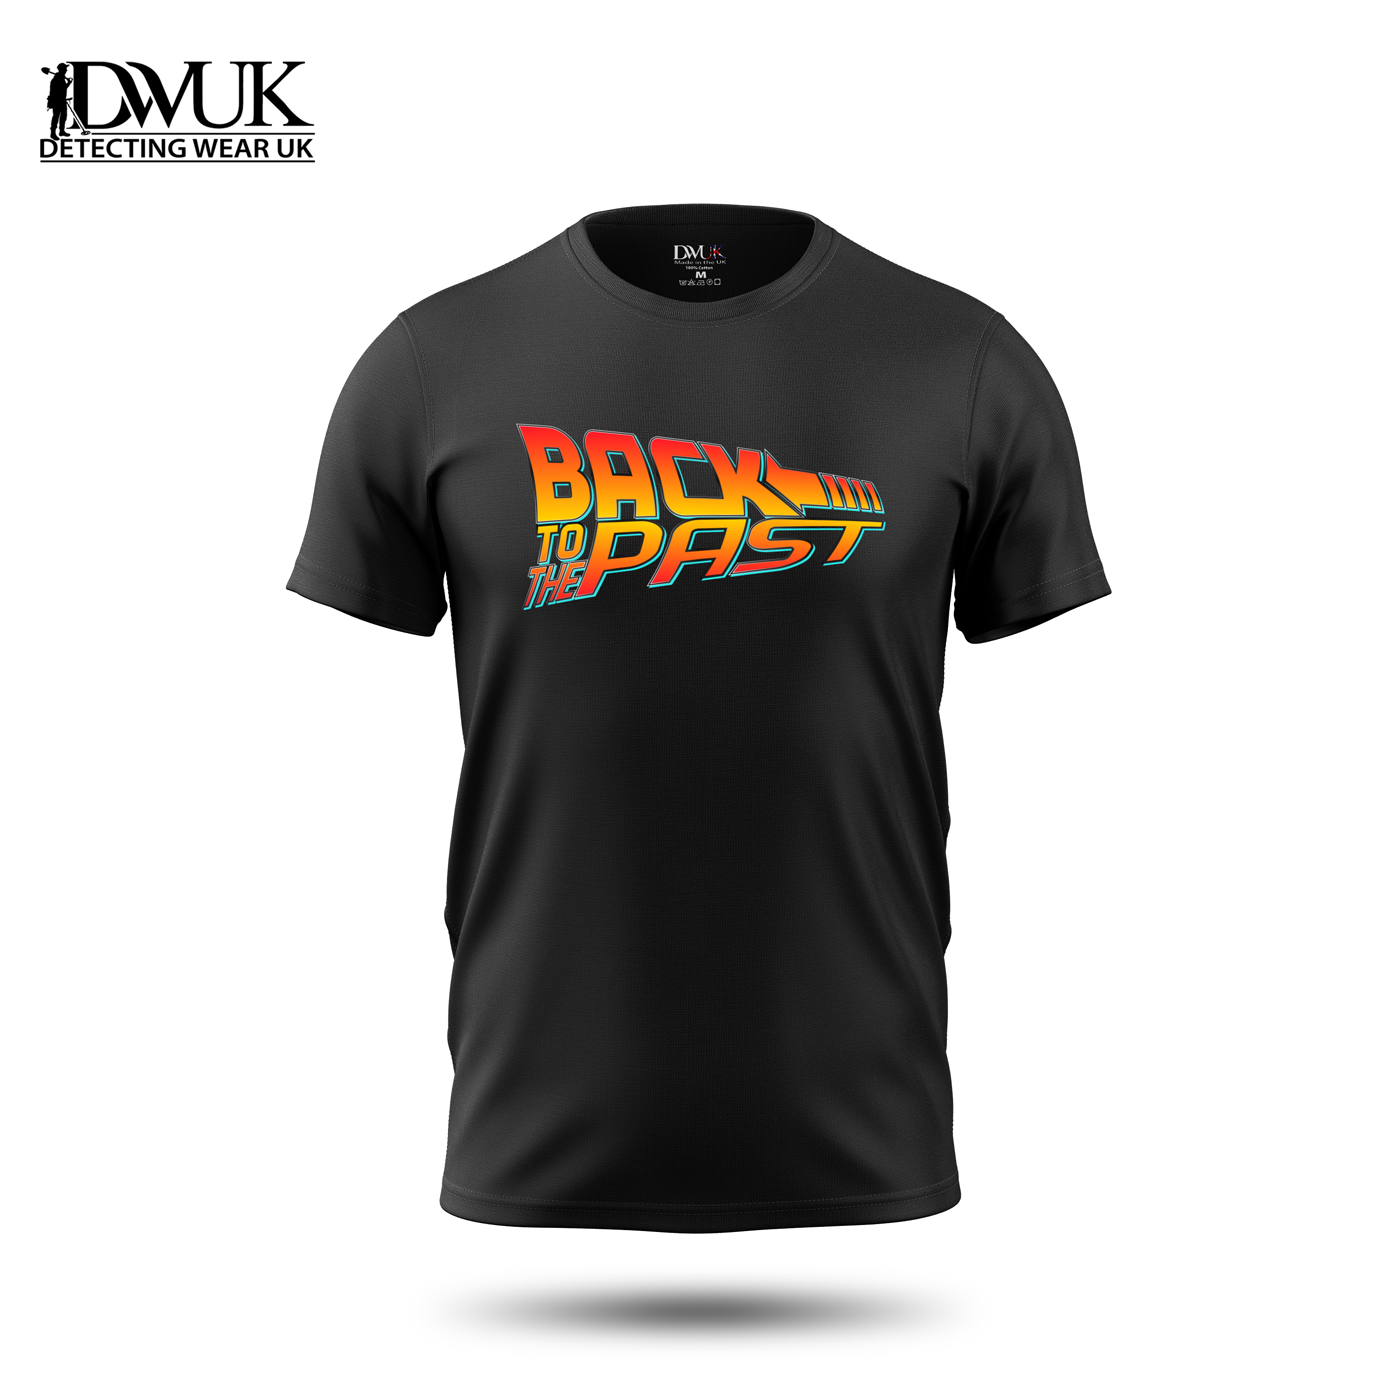 Back to the past T-Shirt